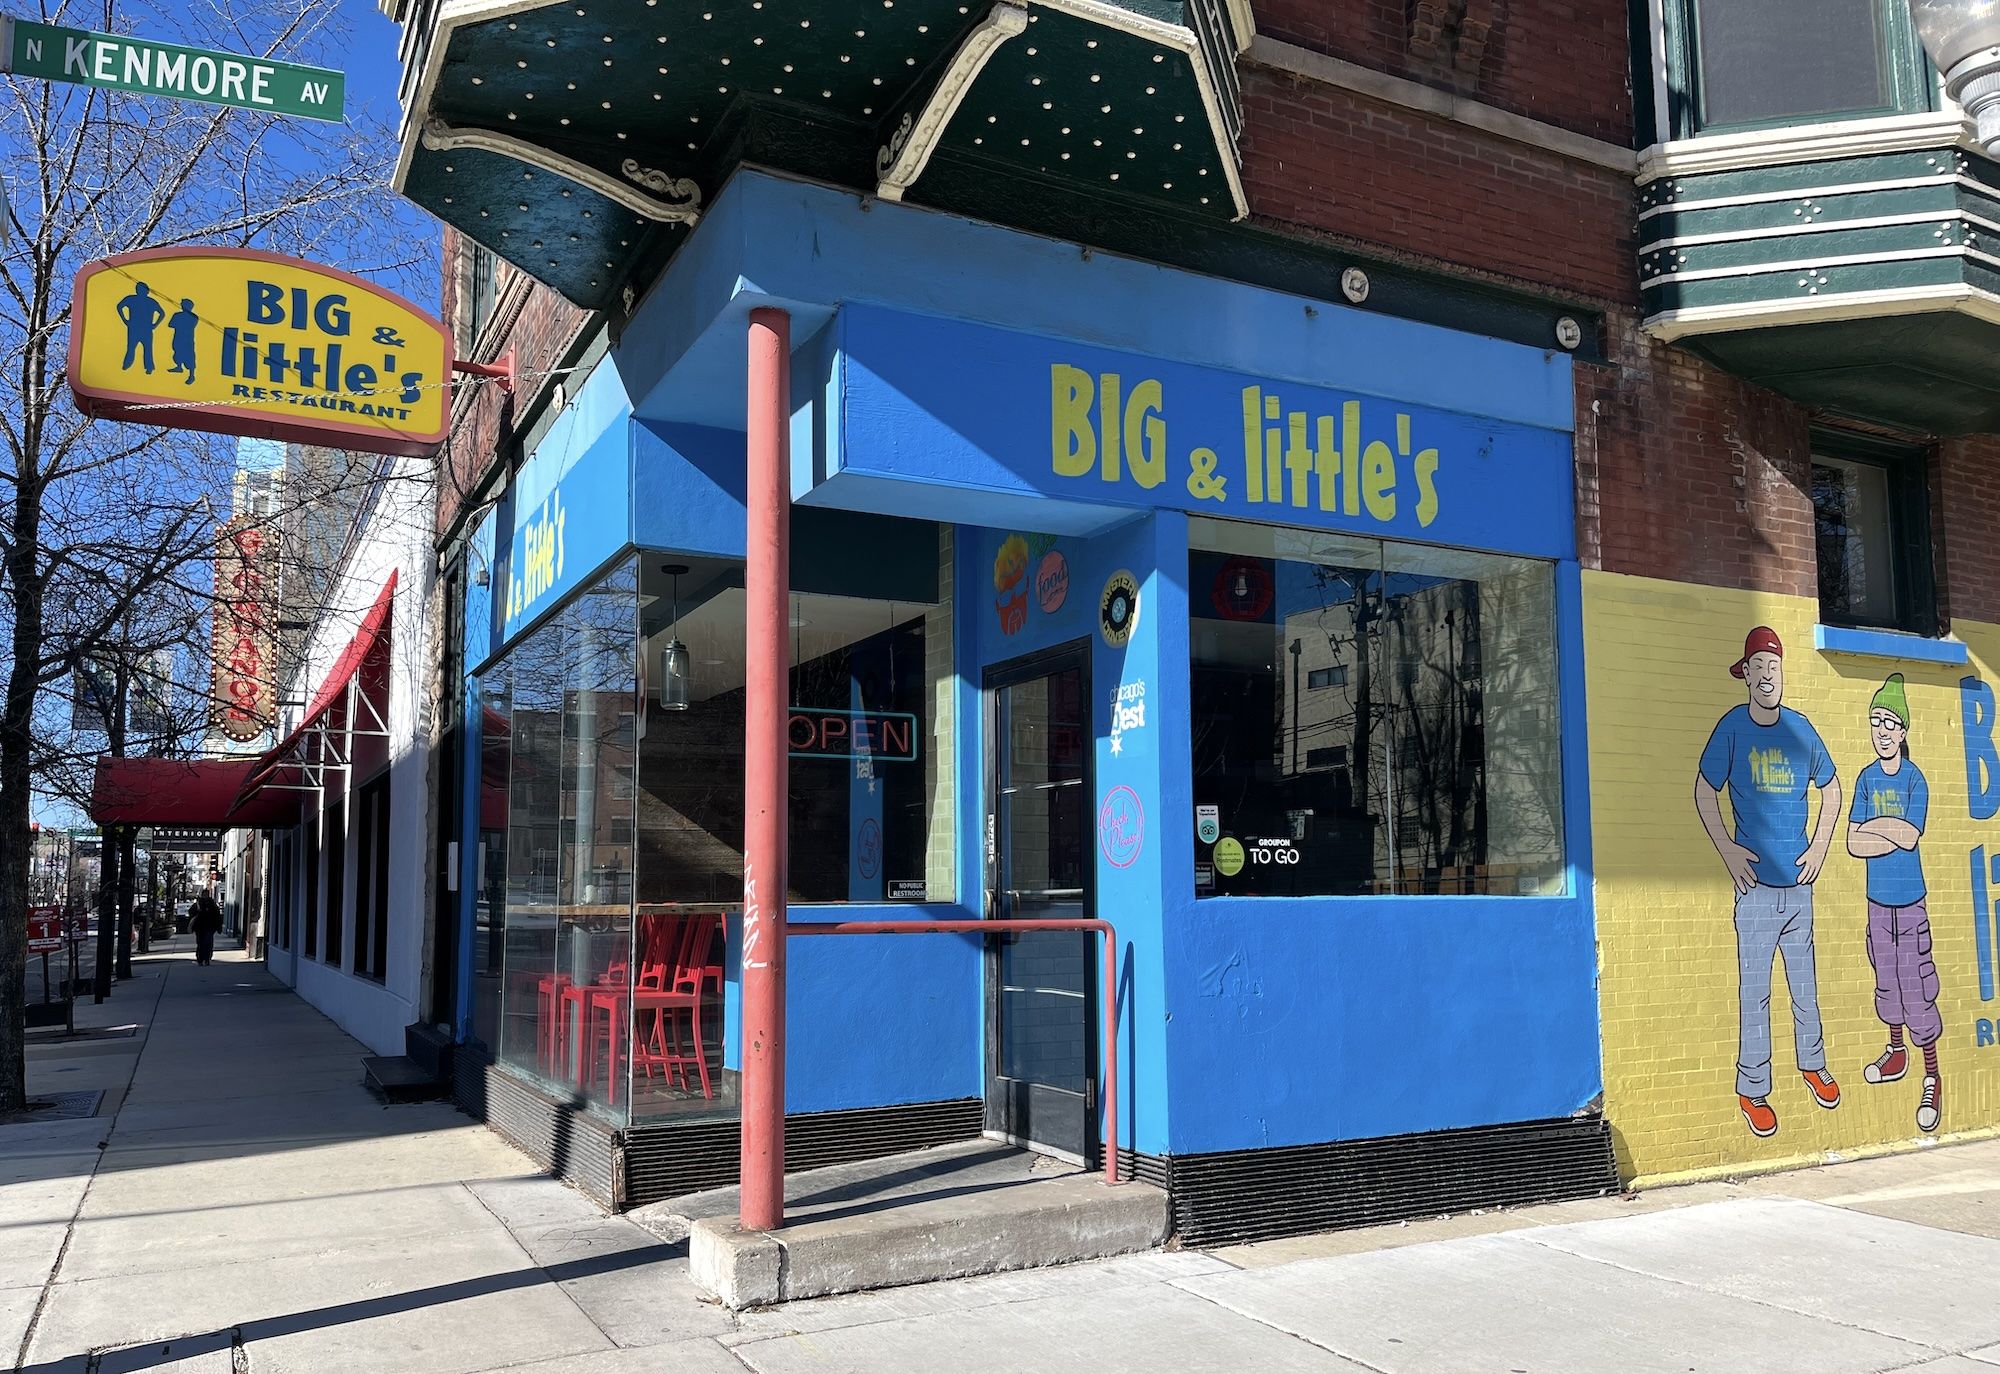 Yellow and blue painted exterior of restaurant with a mural of a larger and smaller man painted on it.